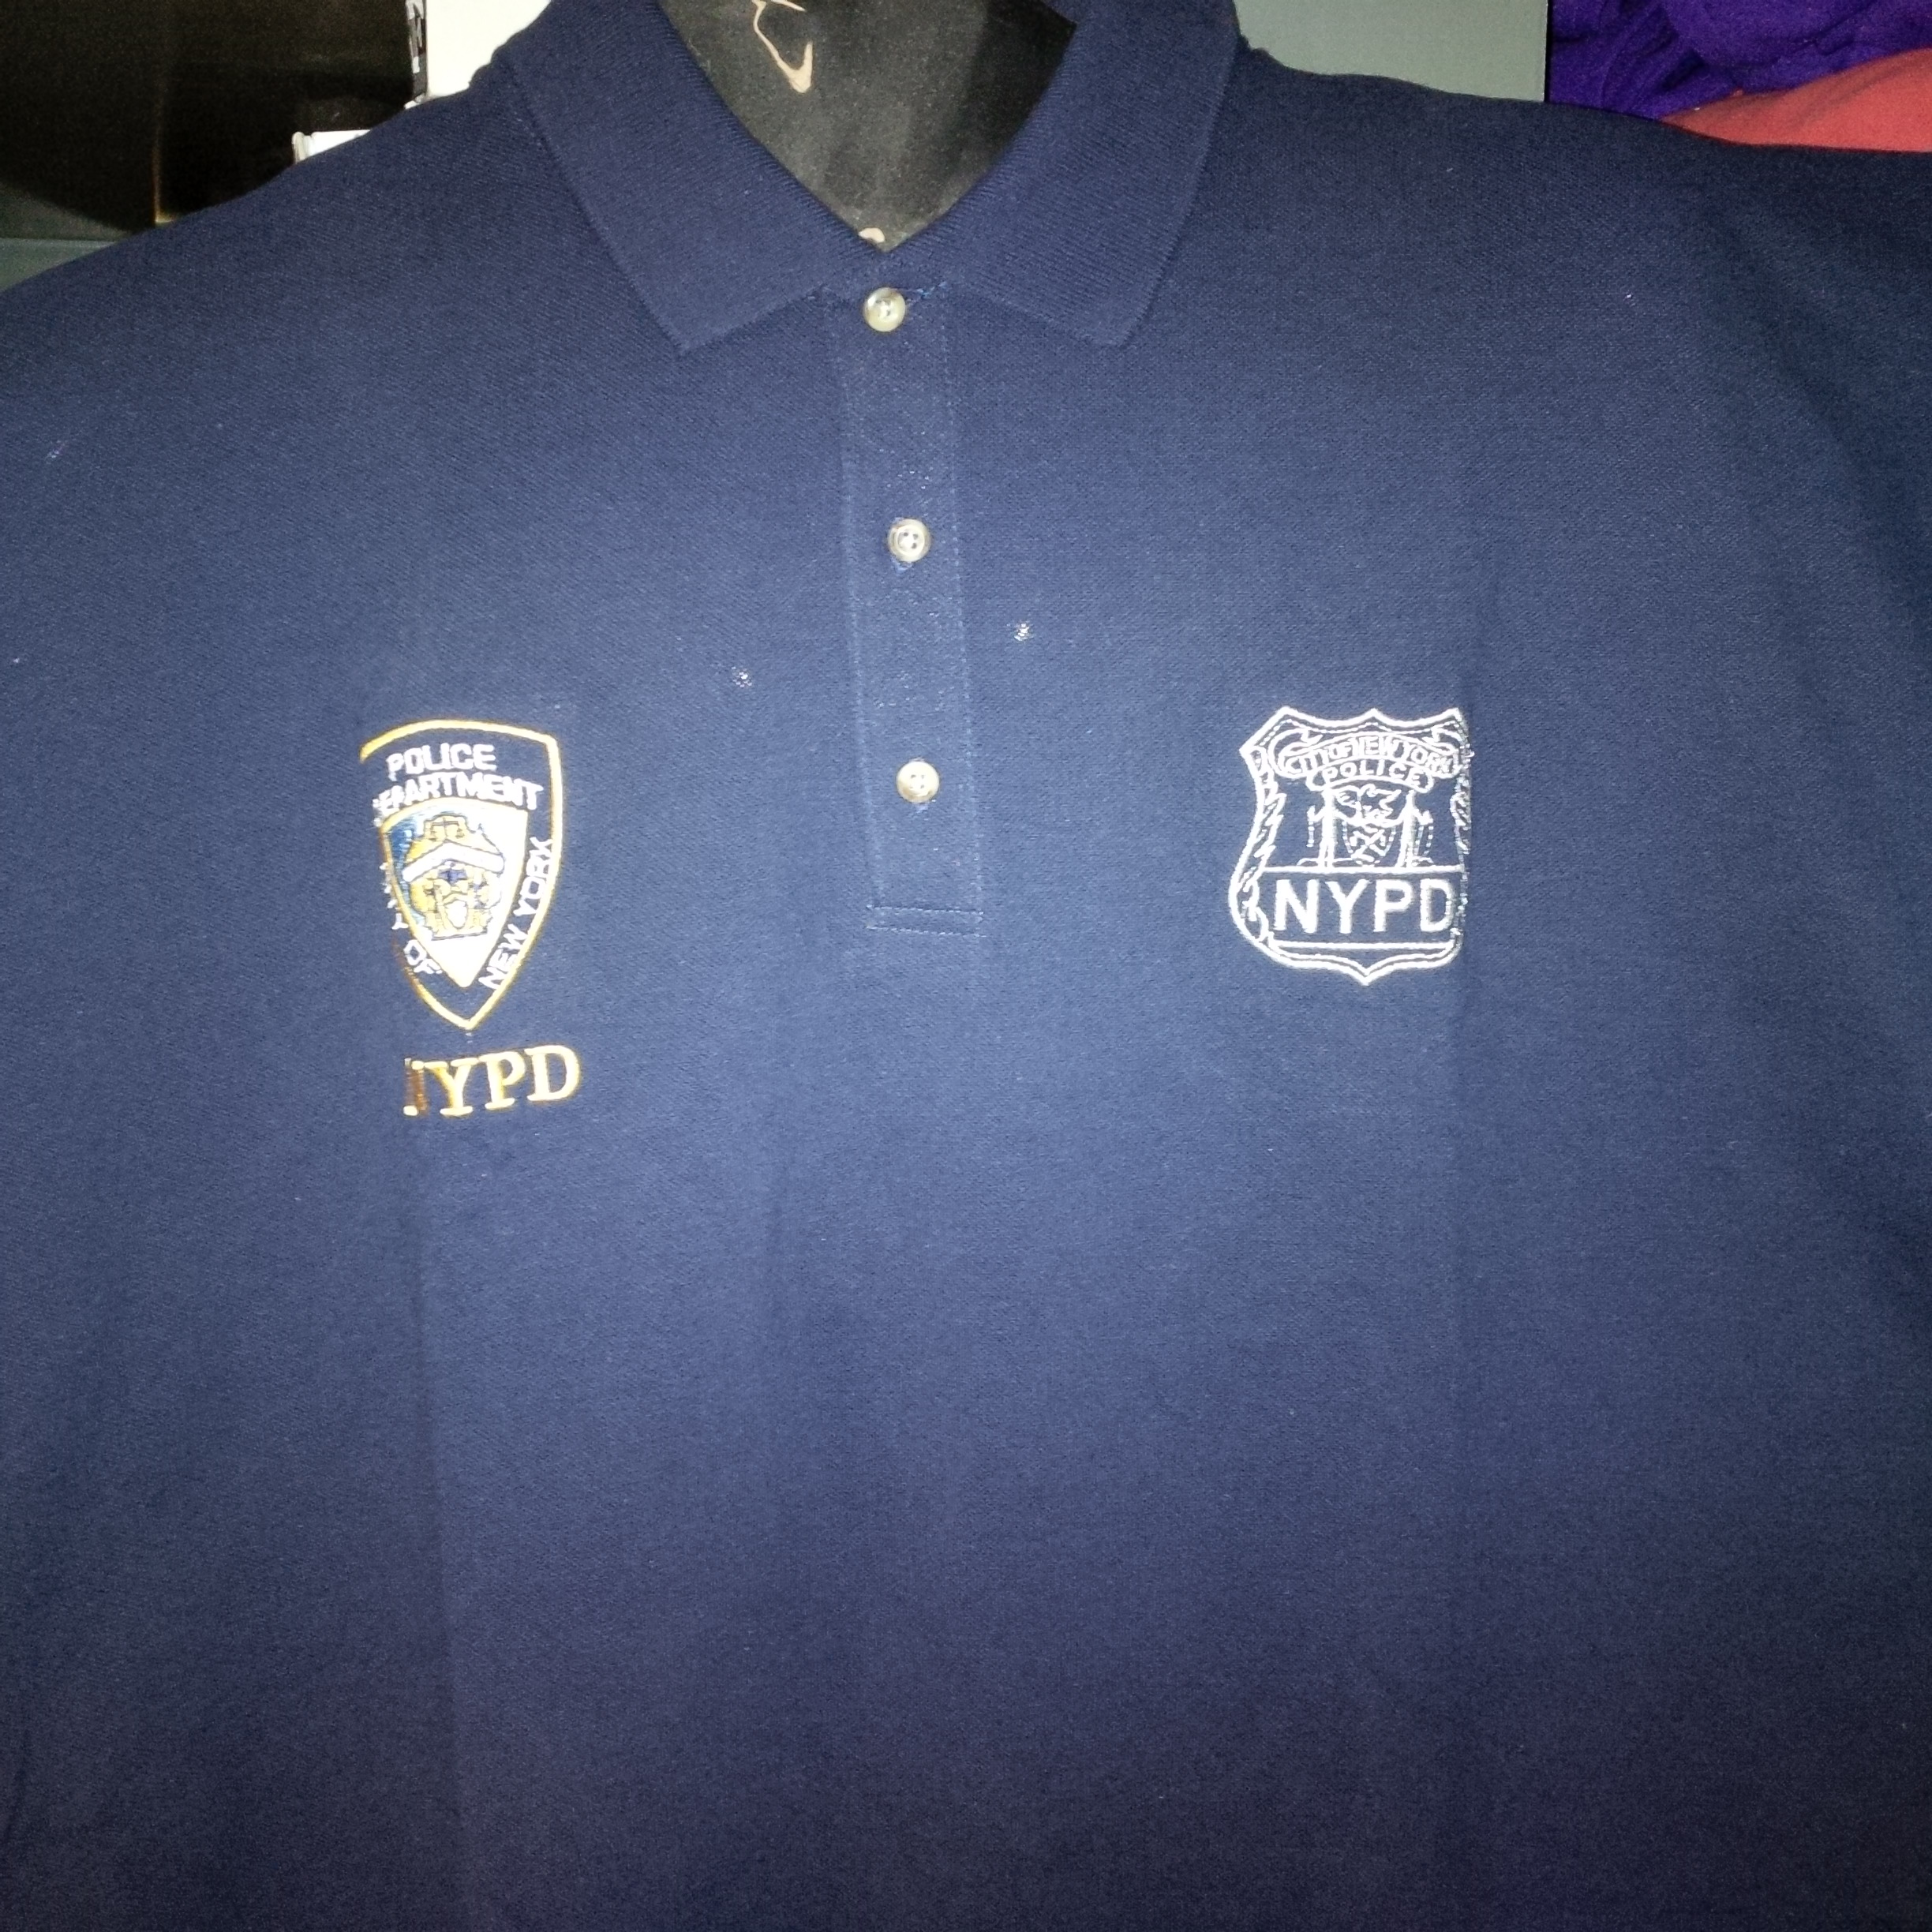 NYPD DOUBLE SHIELD GOLF SHIRT - NYPD DOUBLE SHIELD GOLF SHIRT